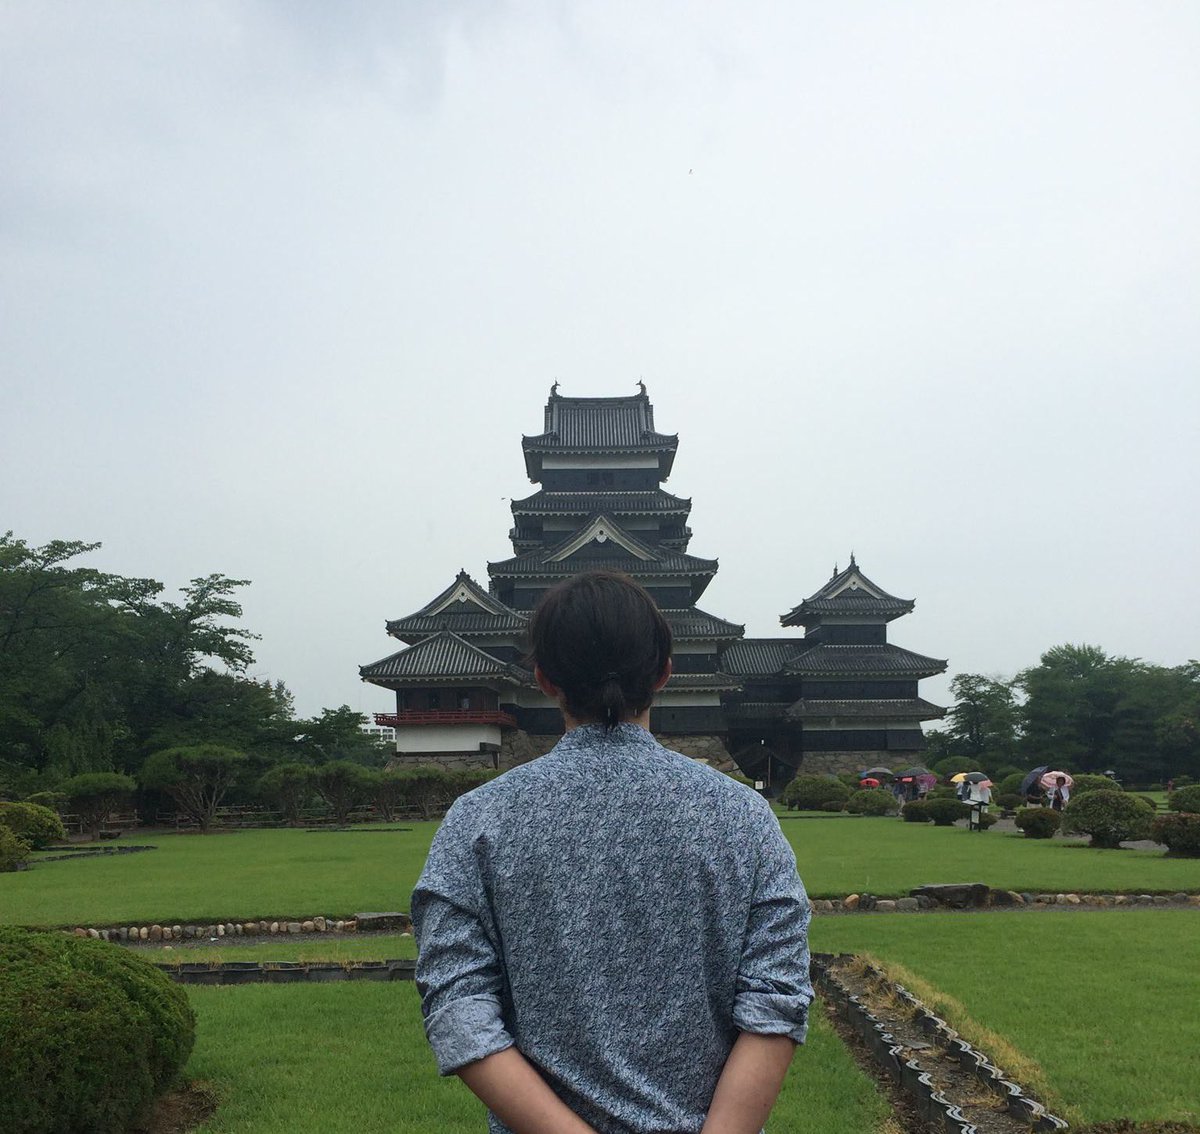 I was able to visit Matsumoto Castle which was given to him by Takeda Shingen. I toured inside and was able to sit where he would have sat listening to his advisors. It gave me chills